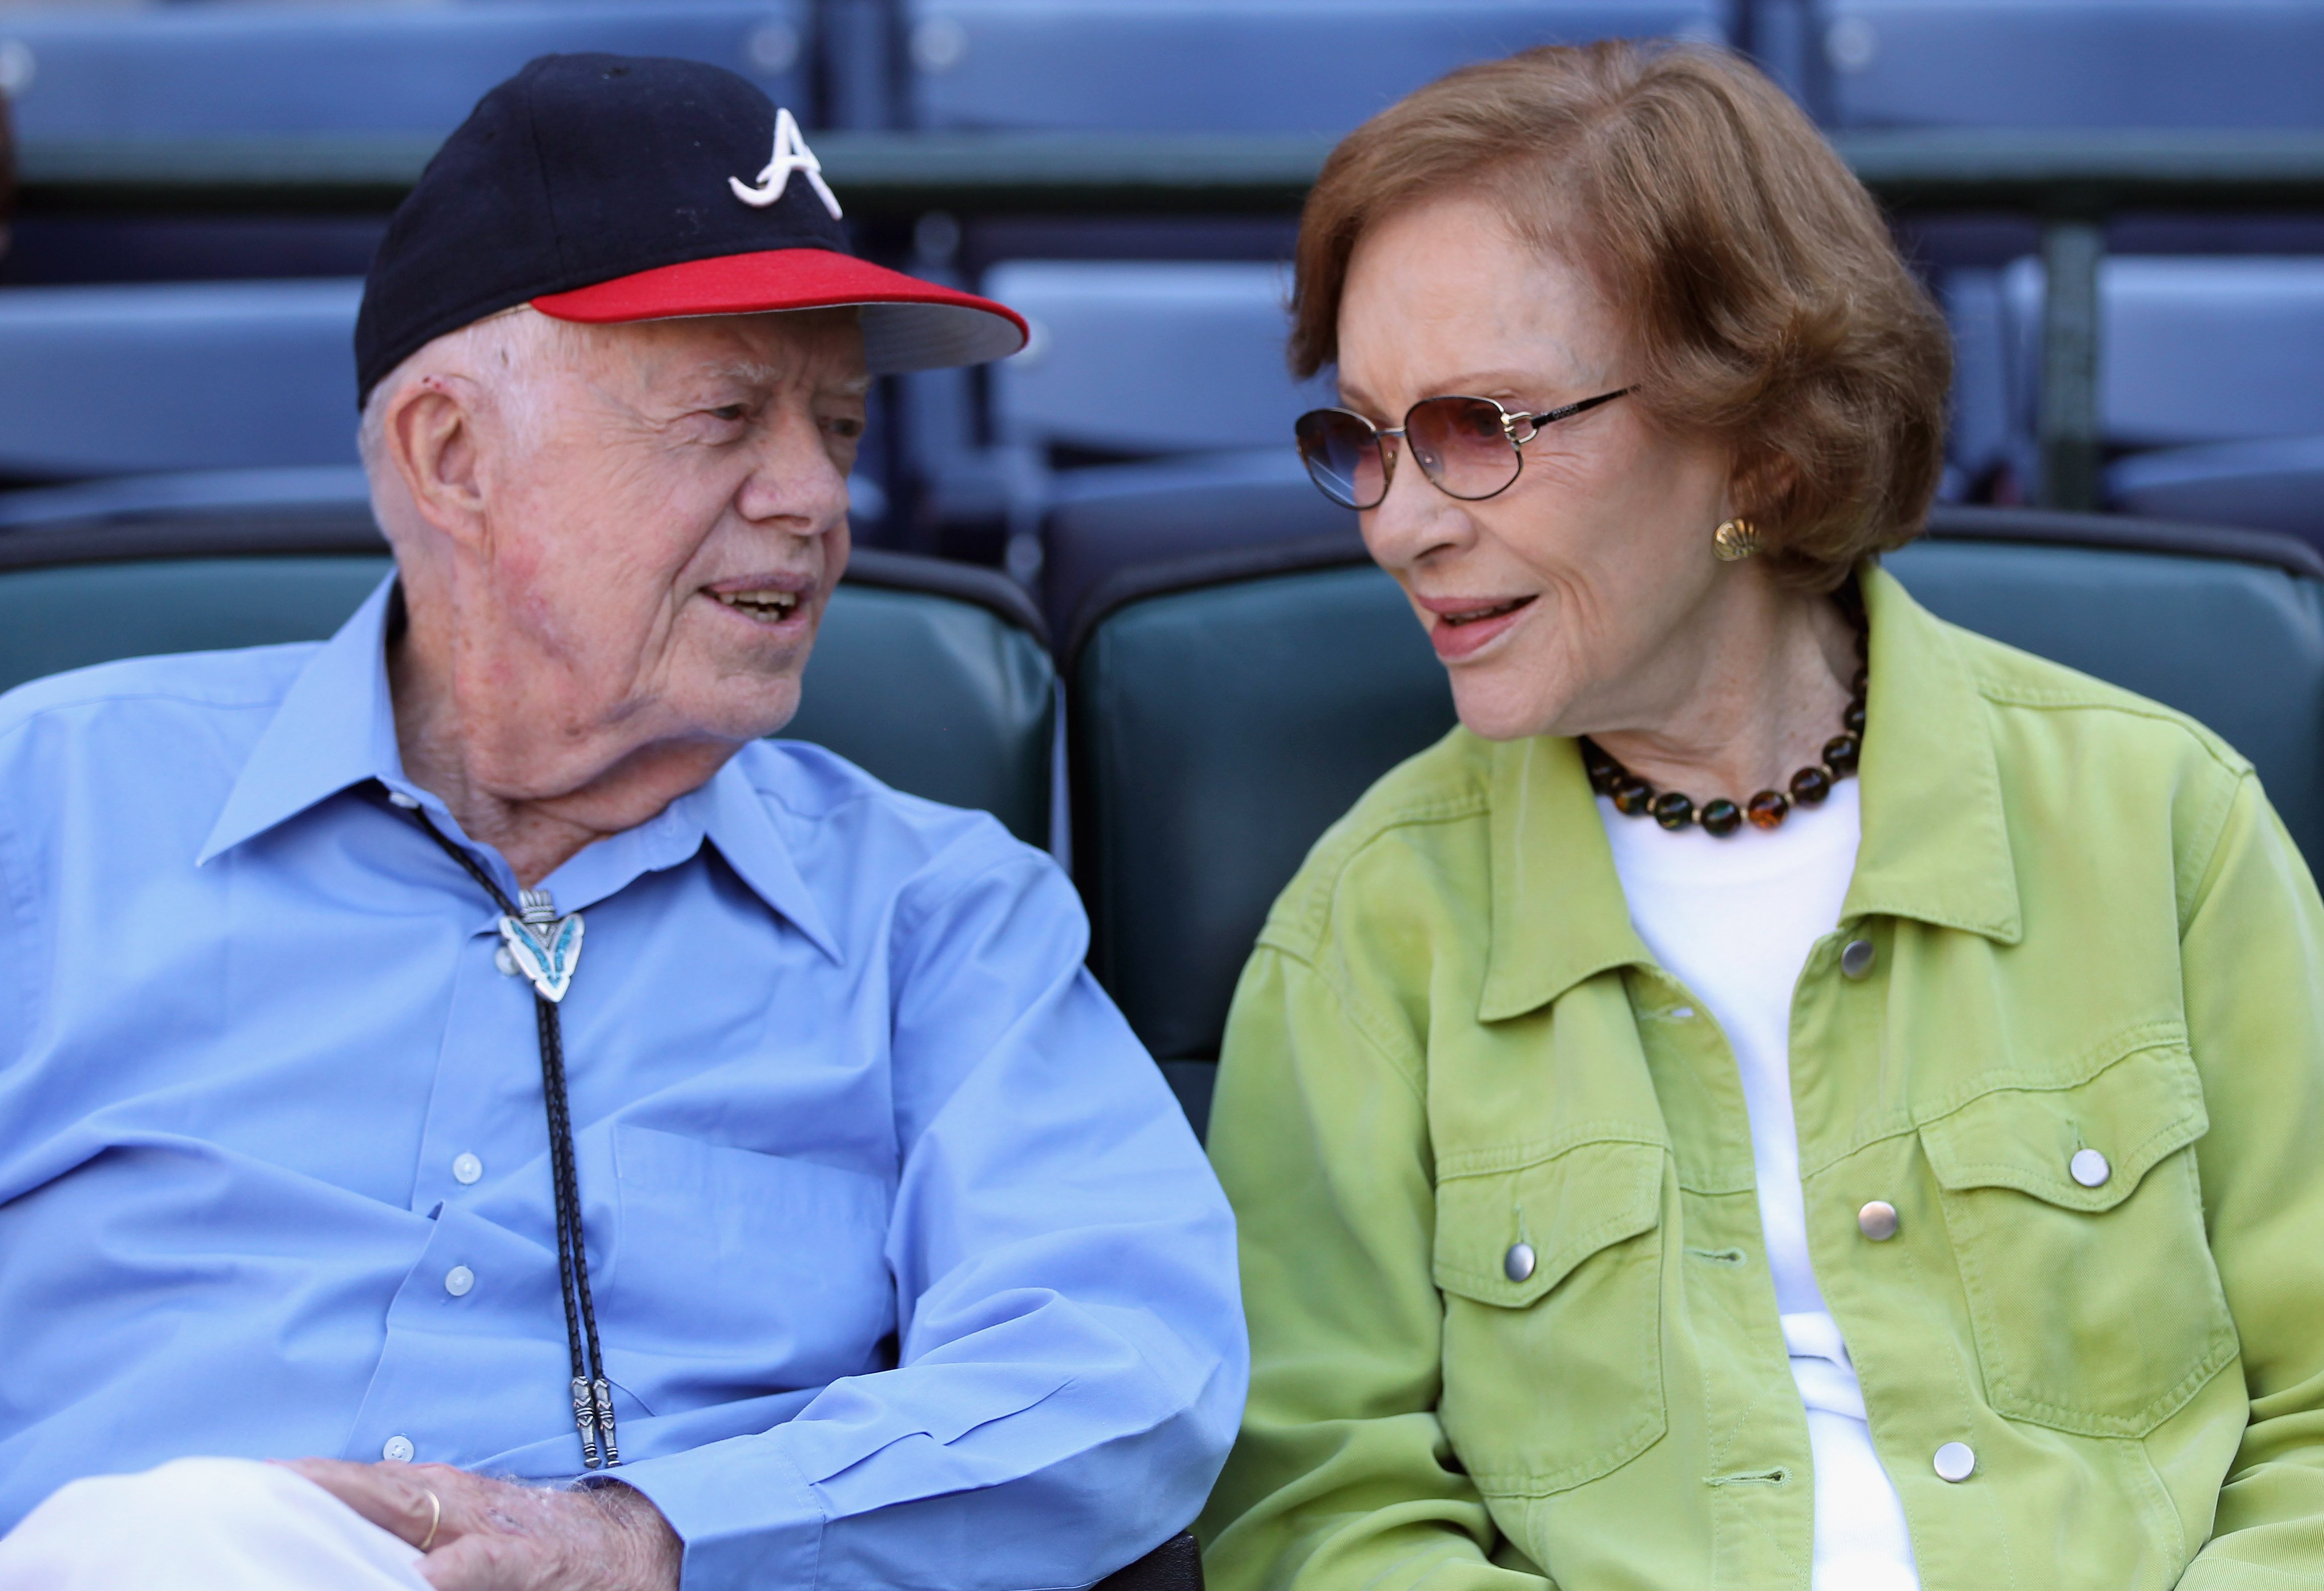 Former President Jimmy Carter and wife Rosalyn on October 10, 2010 at Turner Field in Atlanta, Georgia. | Source: Getty Images